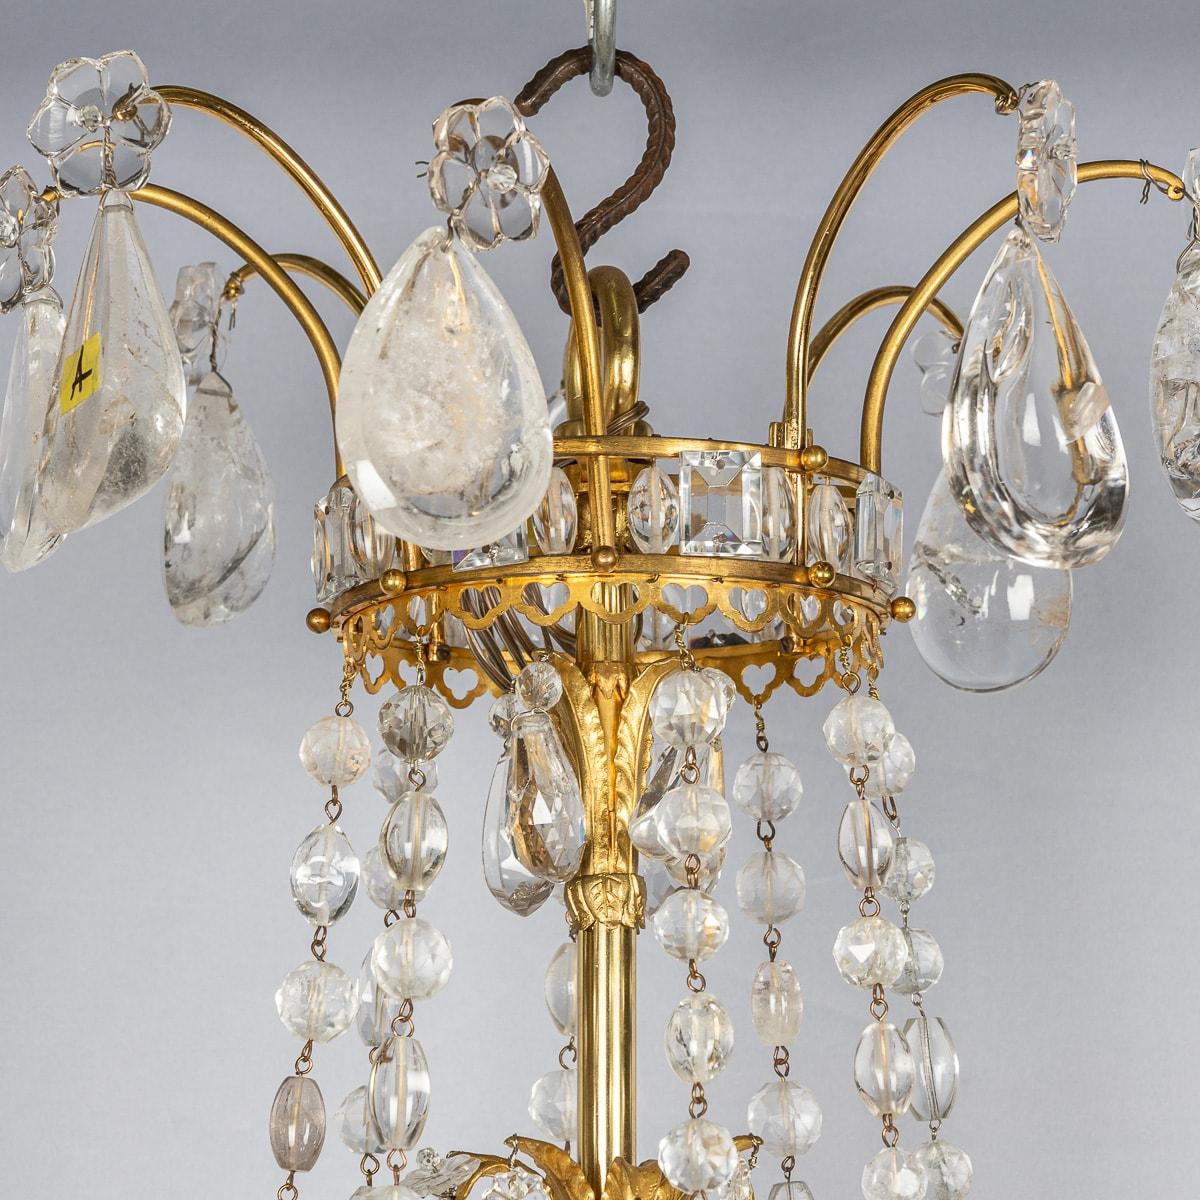 Antique 18th Century French Impressive ormolu bronze and cut rock crystal chandelier. This chandelier is particularly large and magnificent, featuring finely detailed hand cut crystal ornaments shaped like droplets. This chandelier has been